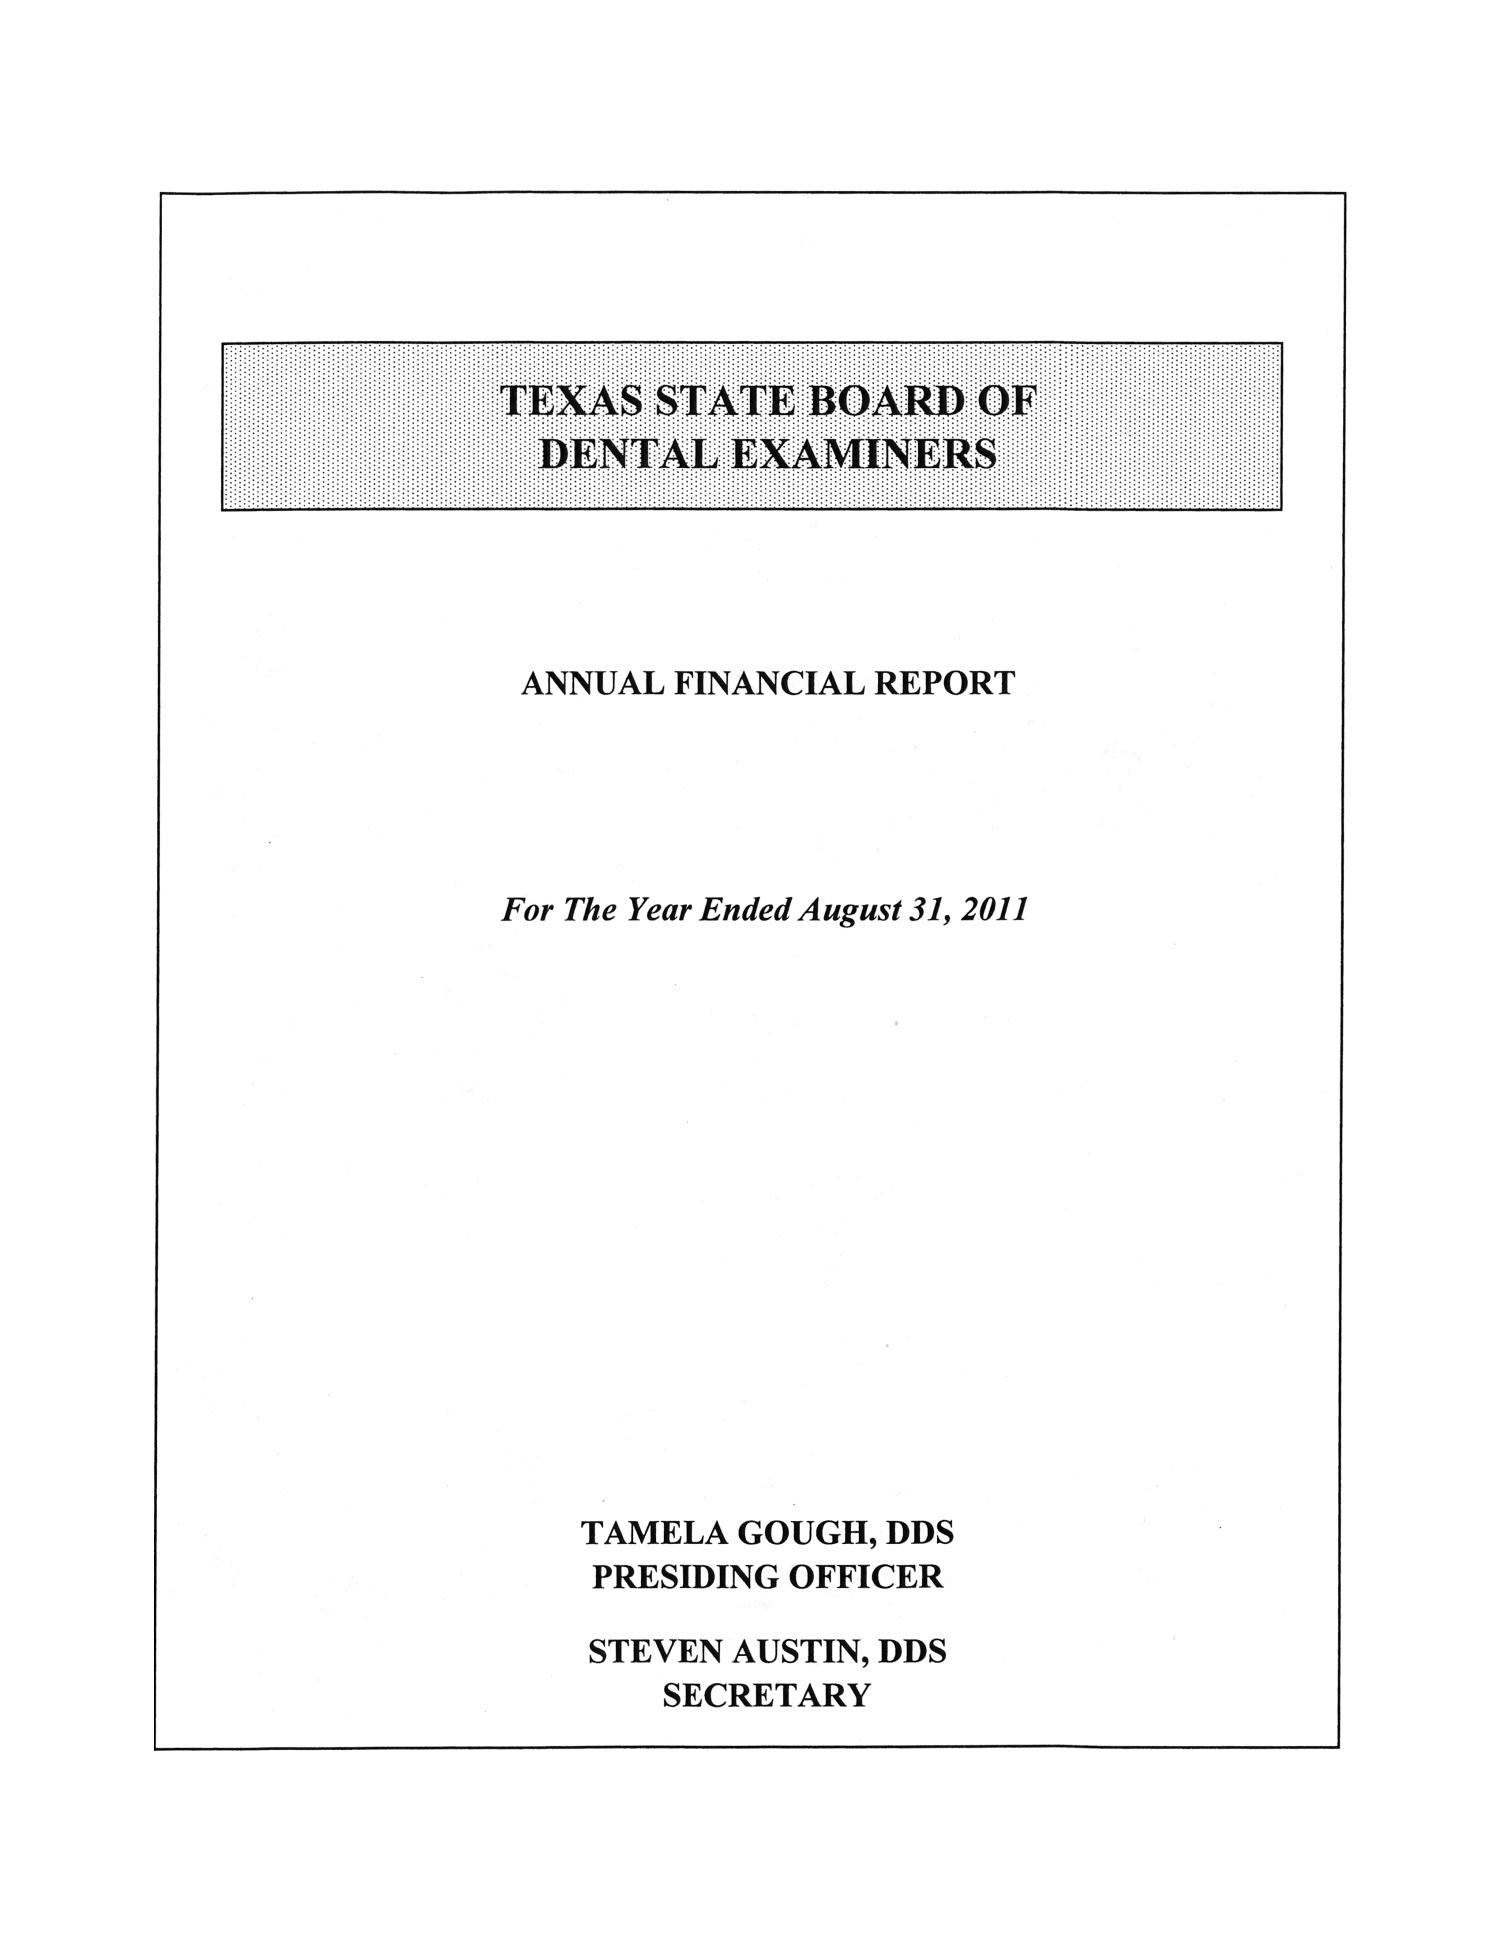 Texas State Board of Dental Examiners Annual Financial Report: 2011
                                                
                                                    Title Page
                                                